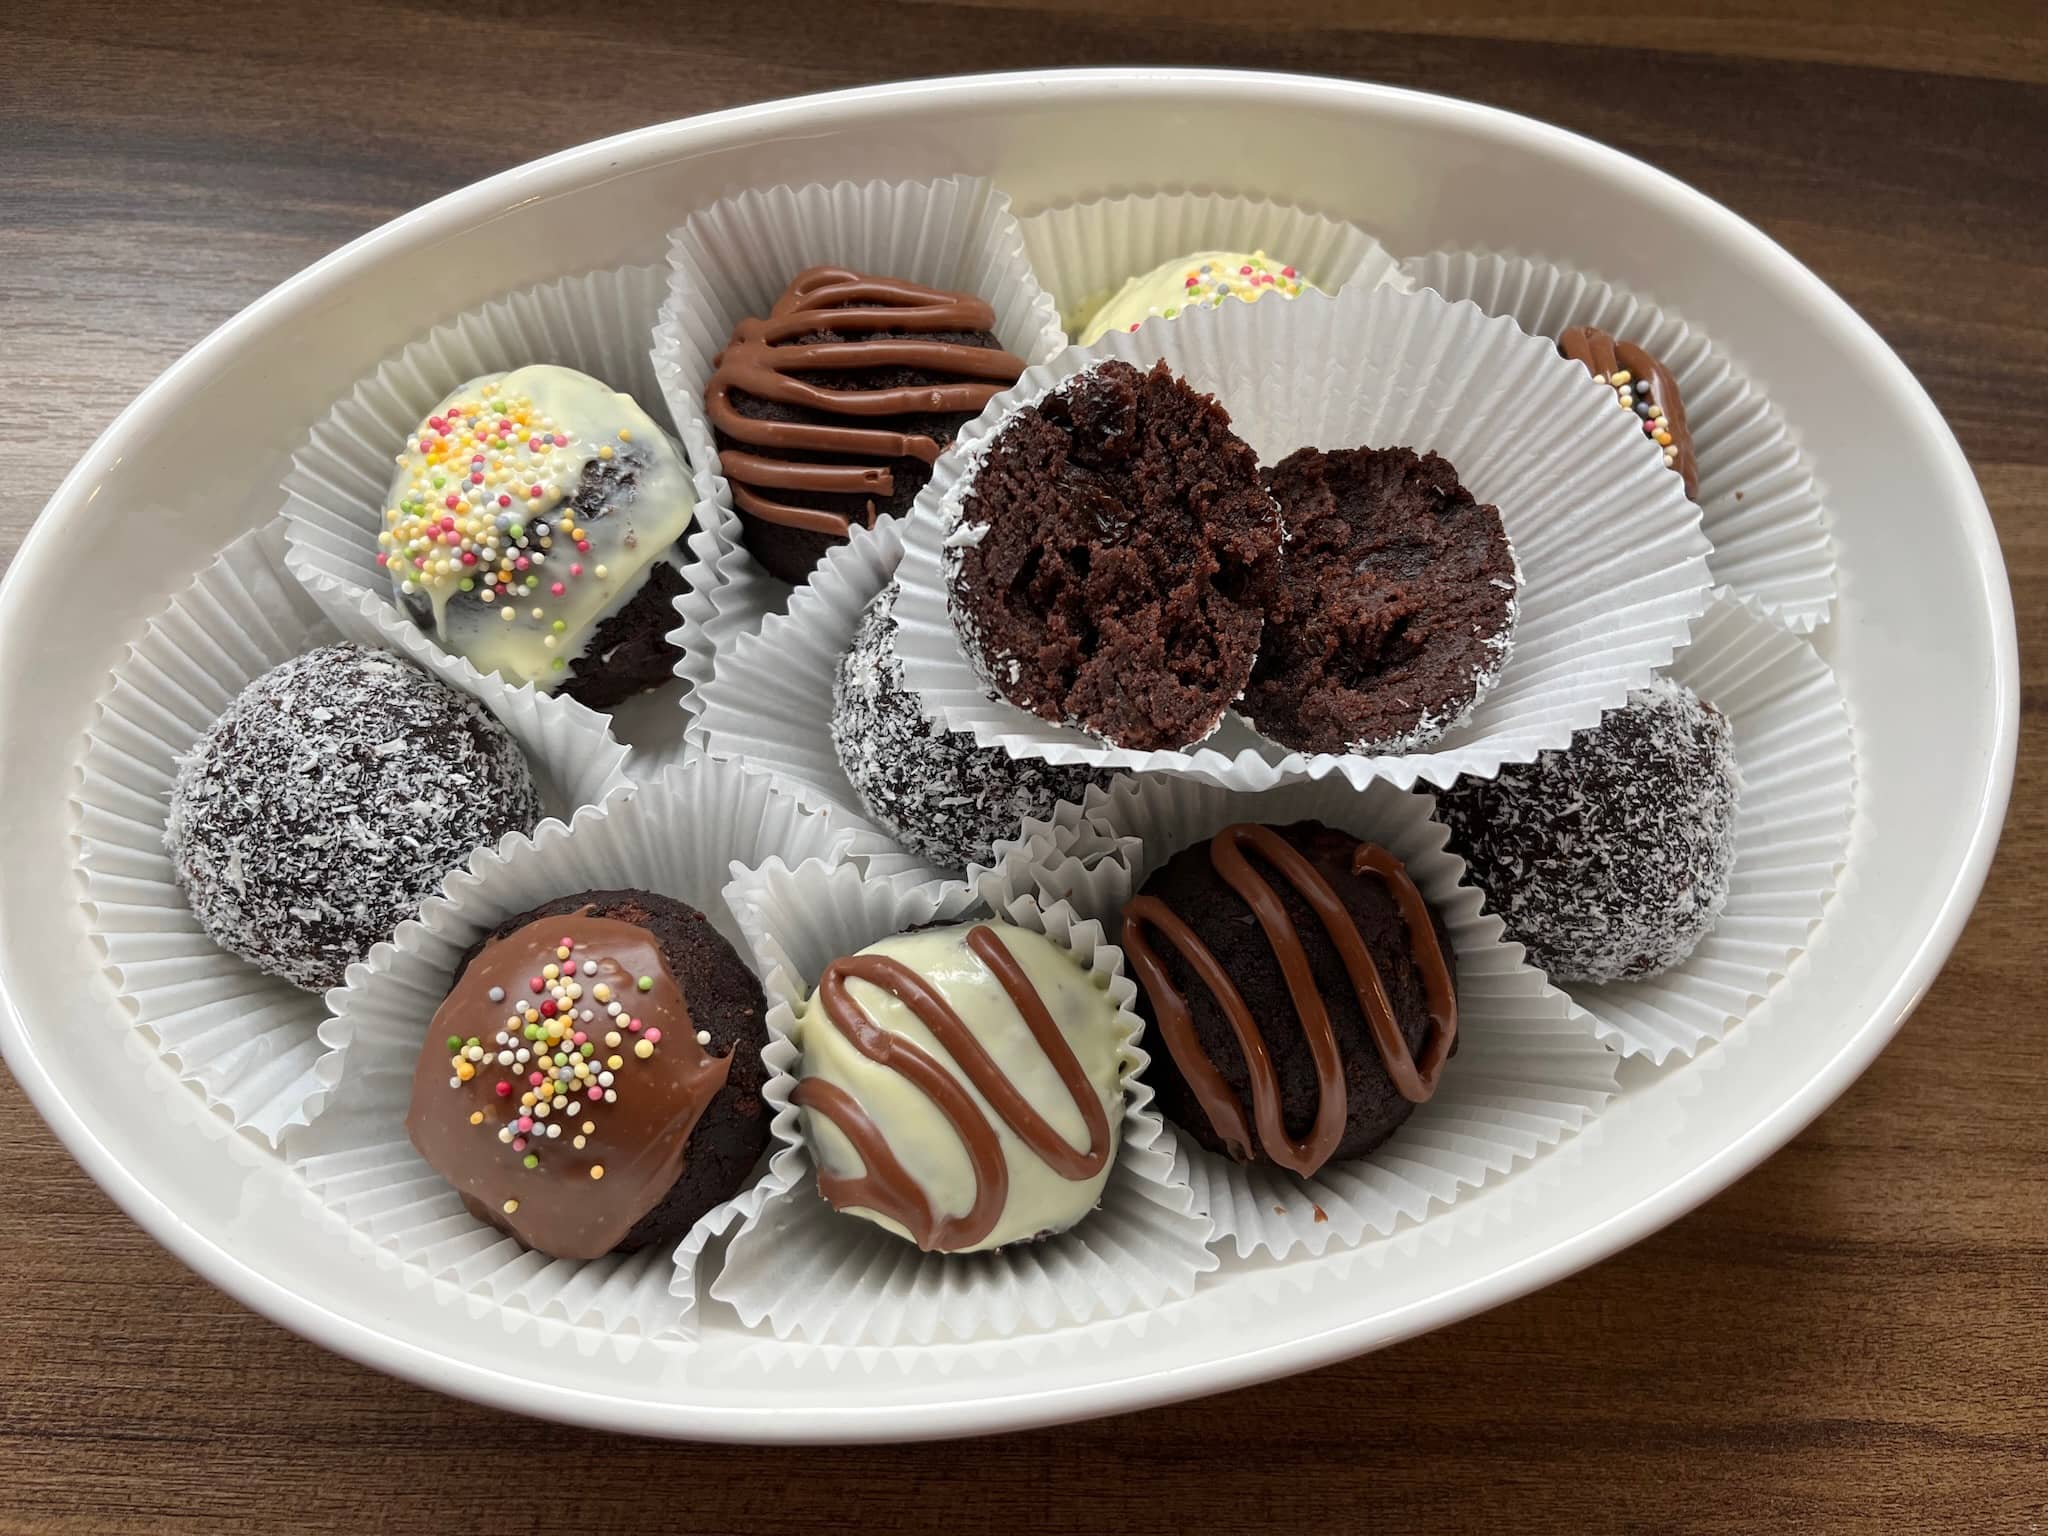 Decorated cake balls in muffin cases on a plate with one broken in half